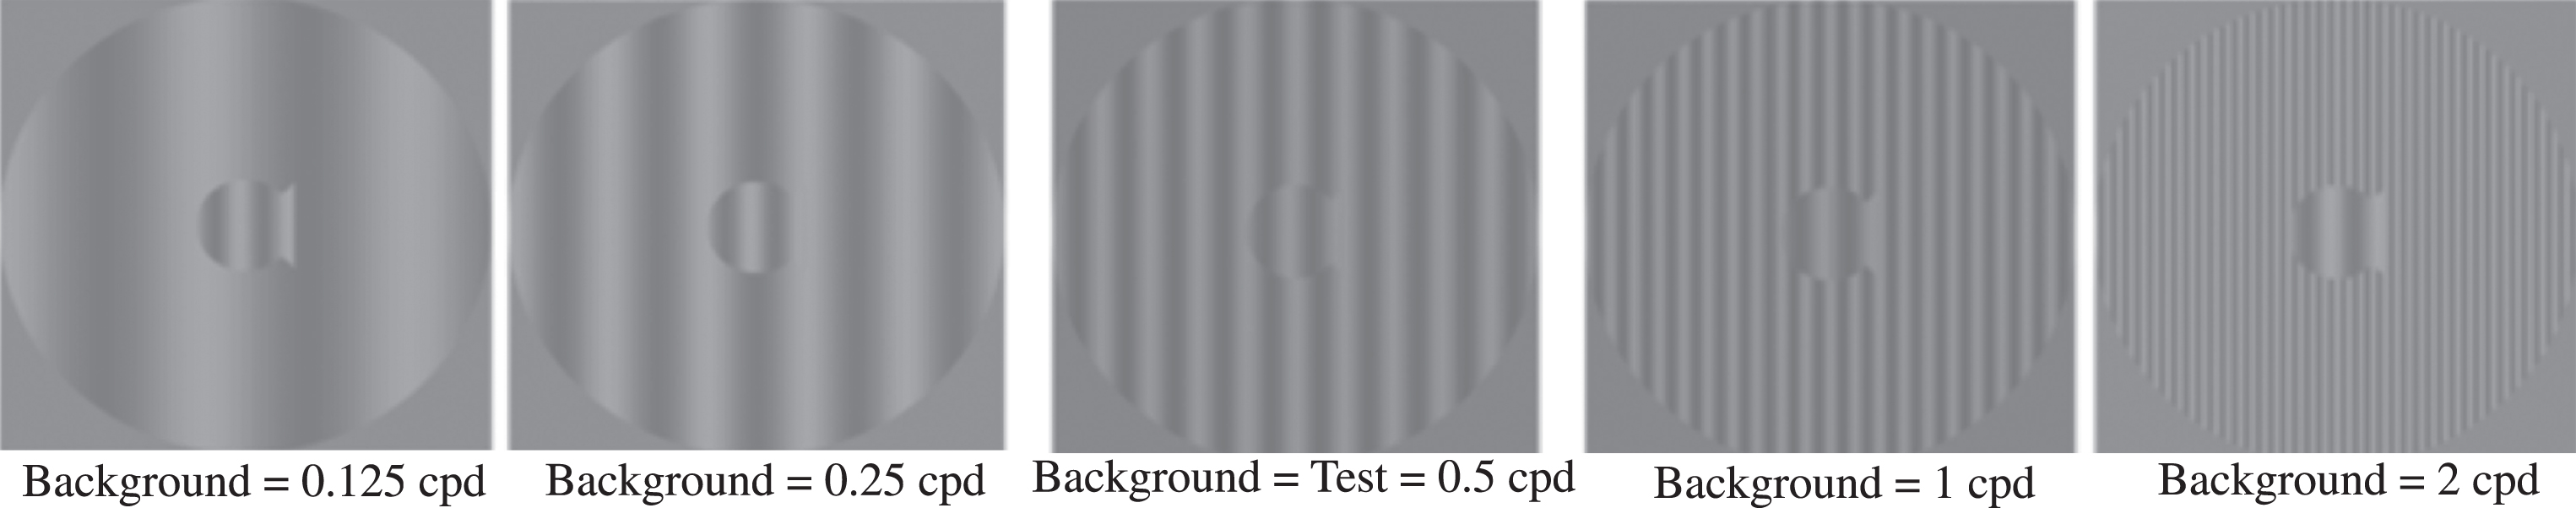 Sample patterns at Complexity Level 1 for a background two octaves lower in spatial frequency than the test frequency, one octave lower in spatial frequency than the test frequency, equal in spatial frequency to the test frequency, one octave higher in spatial frequency than the test frequency, and two octaves higher in spatial frequency than the 0.5 cyc/deg “fish shaped” test pattern. This same set of backgrounds was presented in this order for each of the 4 test spatial frequencies.